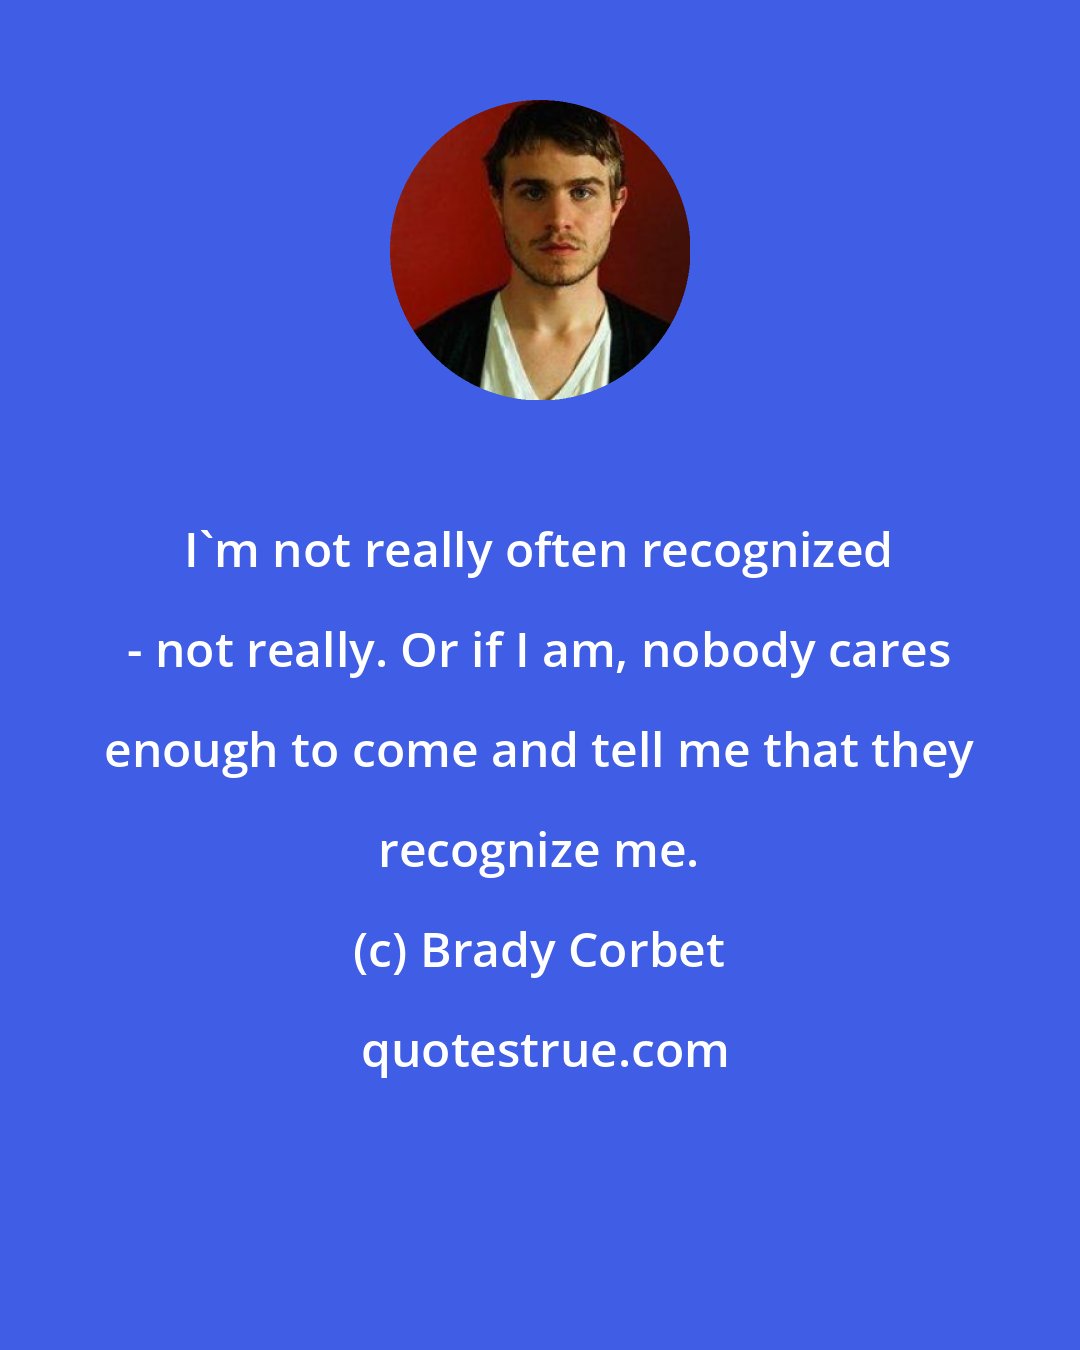 Brady Corbet: I'm not really often recognized - not really. Or if I am, nobody cares enough to come and tell me that they recognize me.